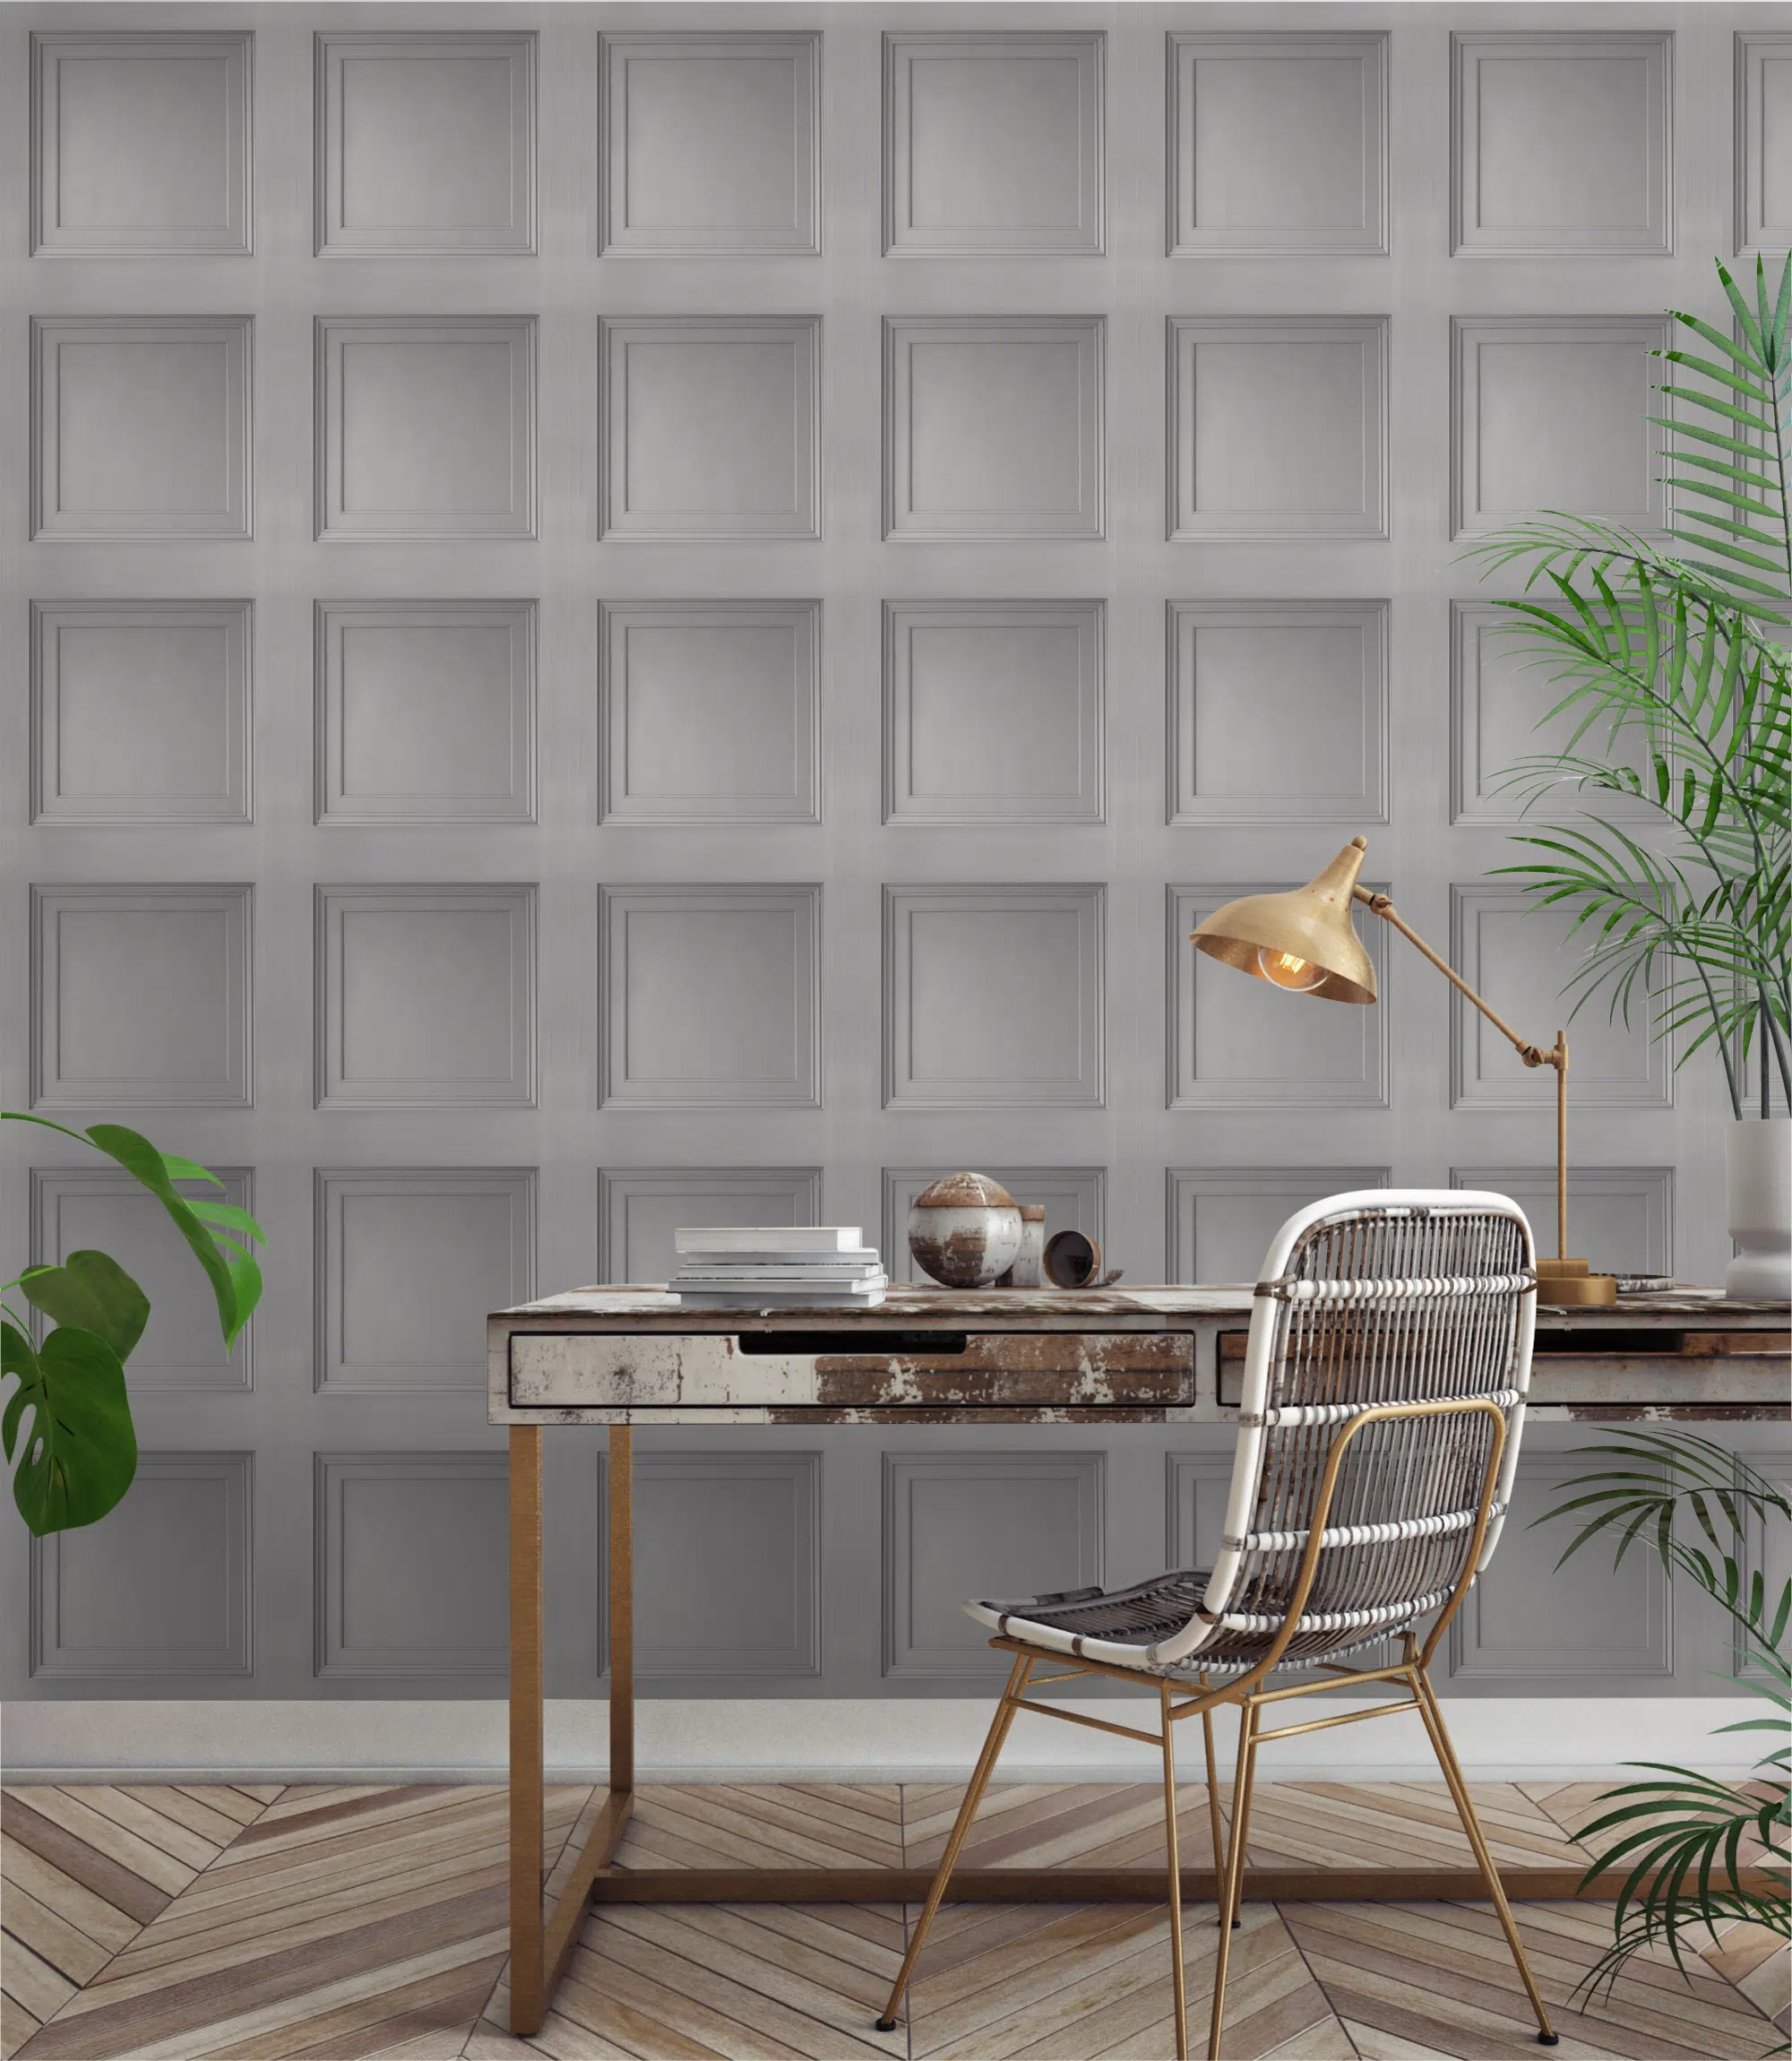 Gray Slatted Wood Interior Wall Panels | Order Online